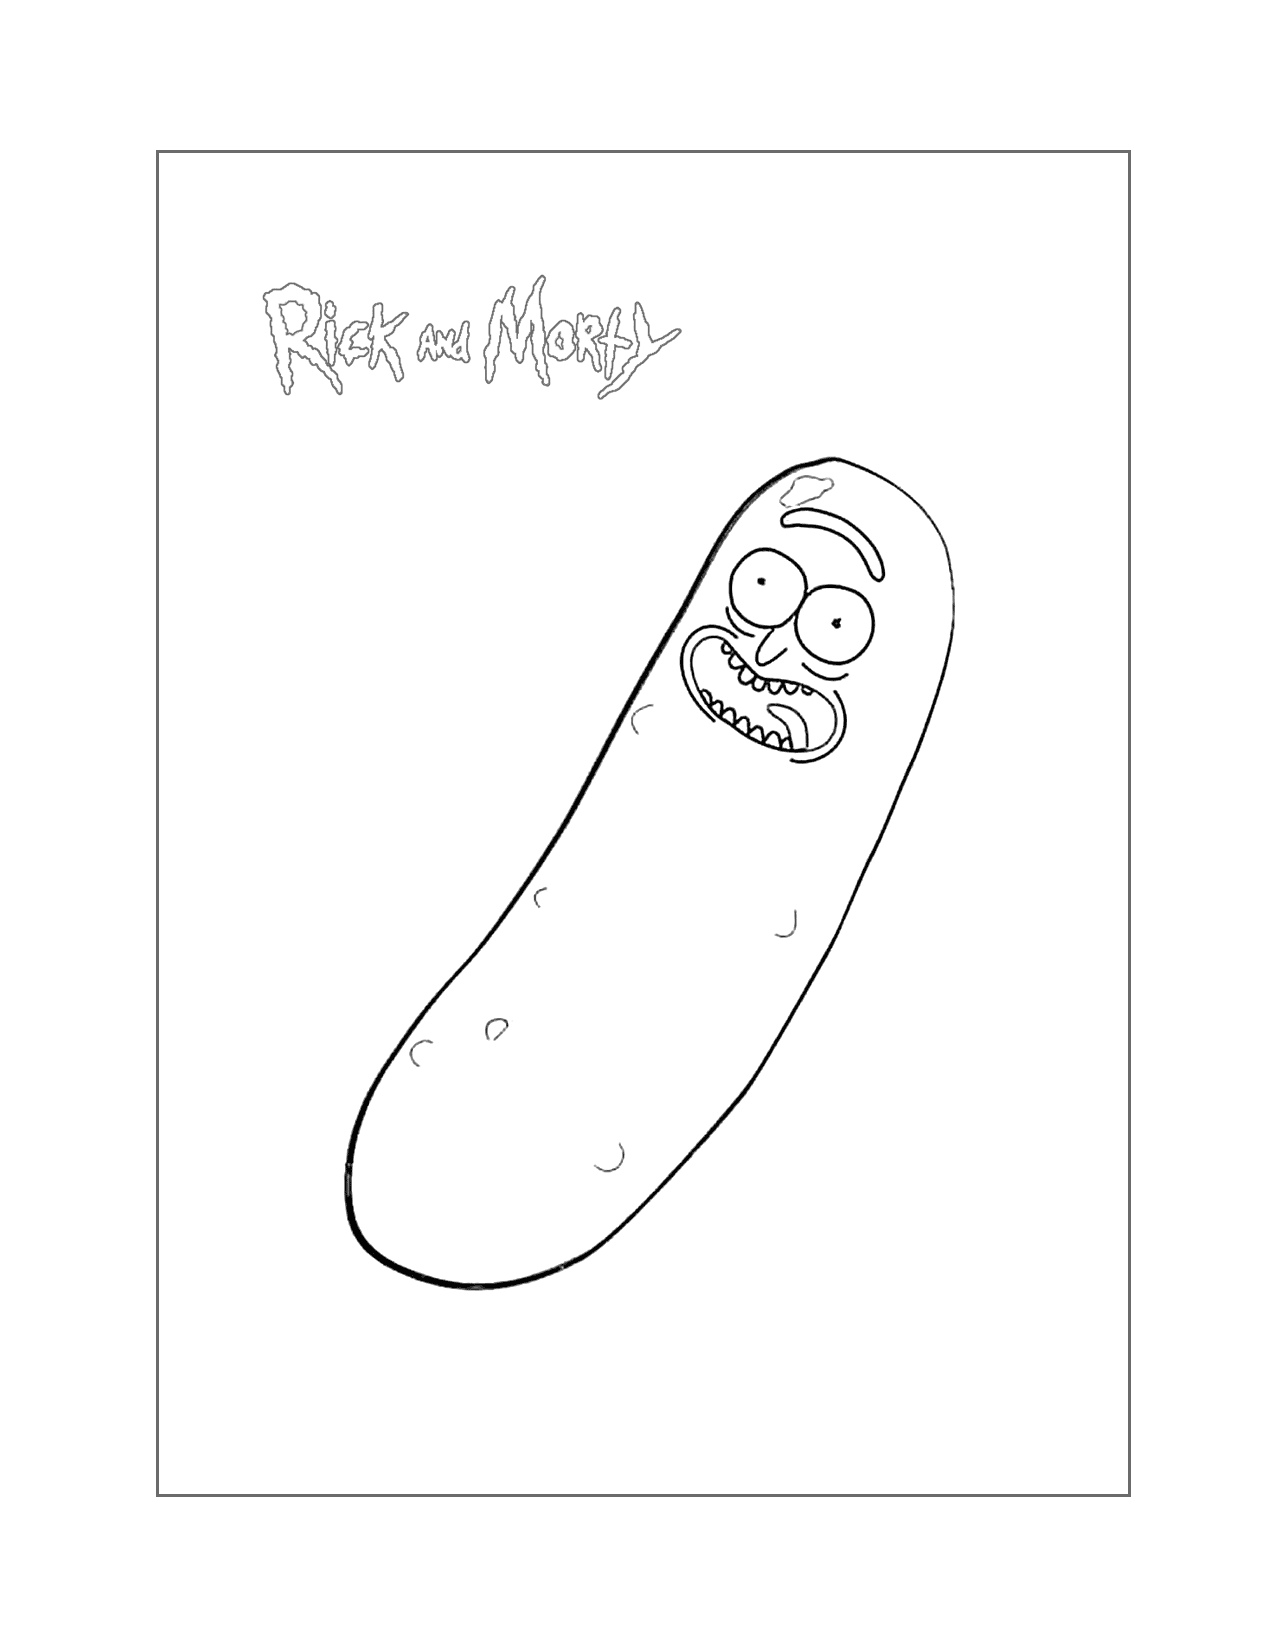 Pickle Rick Coloring Page